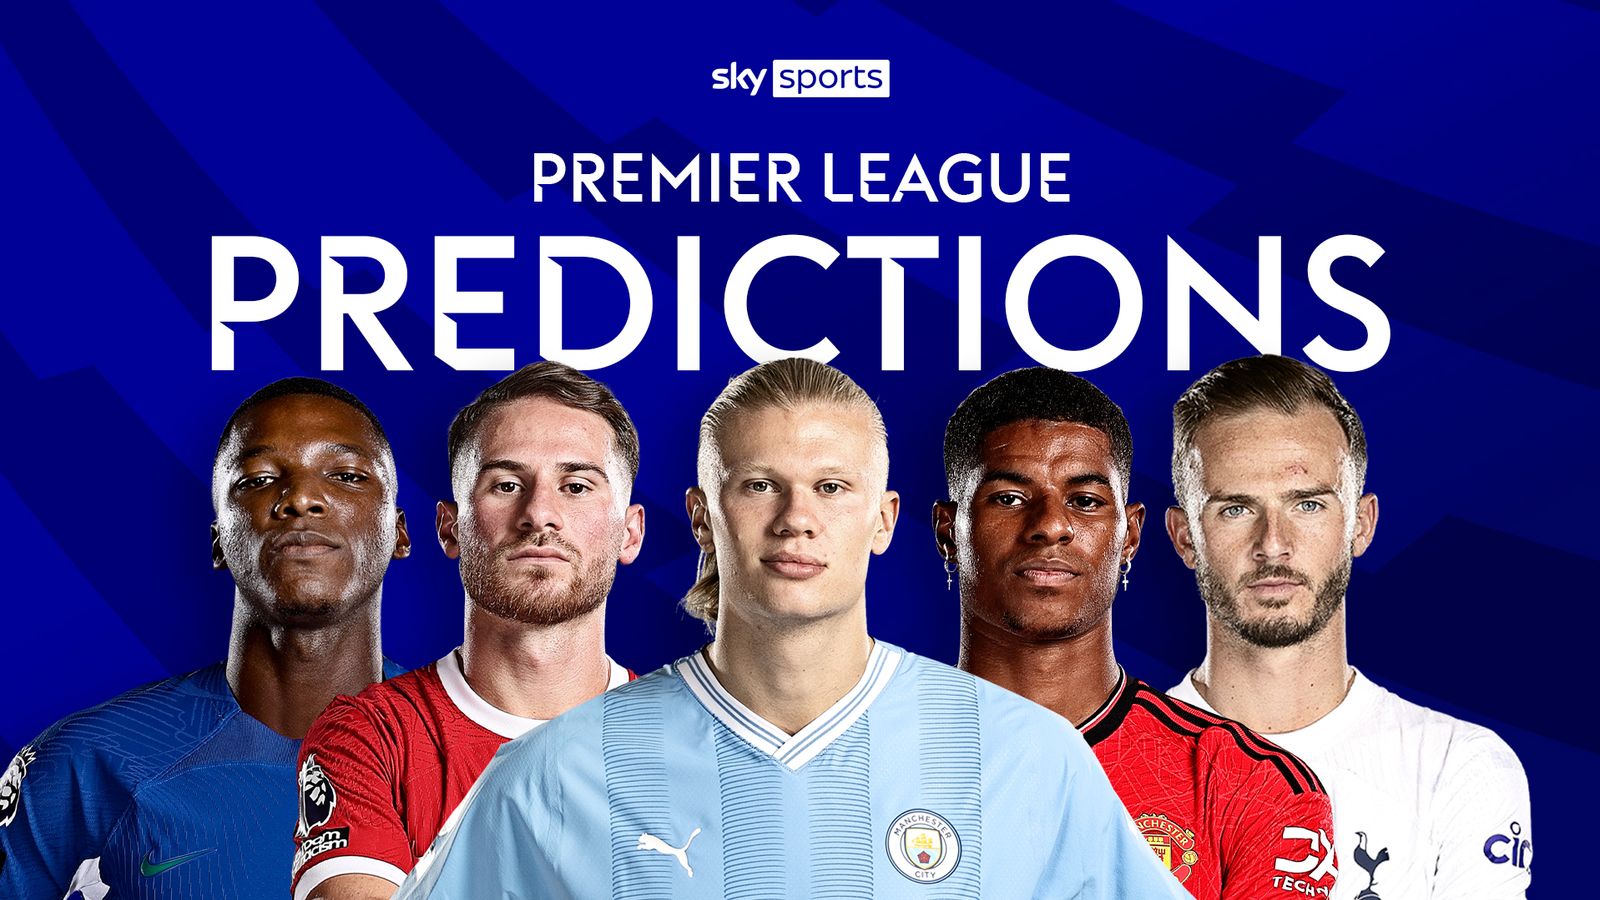 Premier League predictions: Arsenal to lose at underrated Bournemouth | Heung-Min Son to strike vs Liverpool